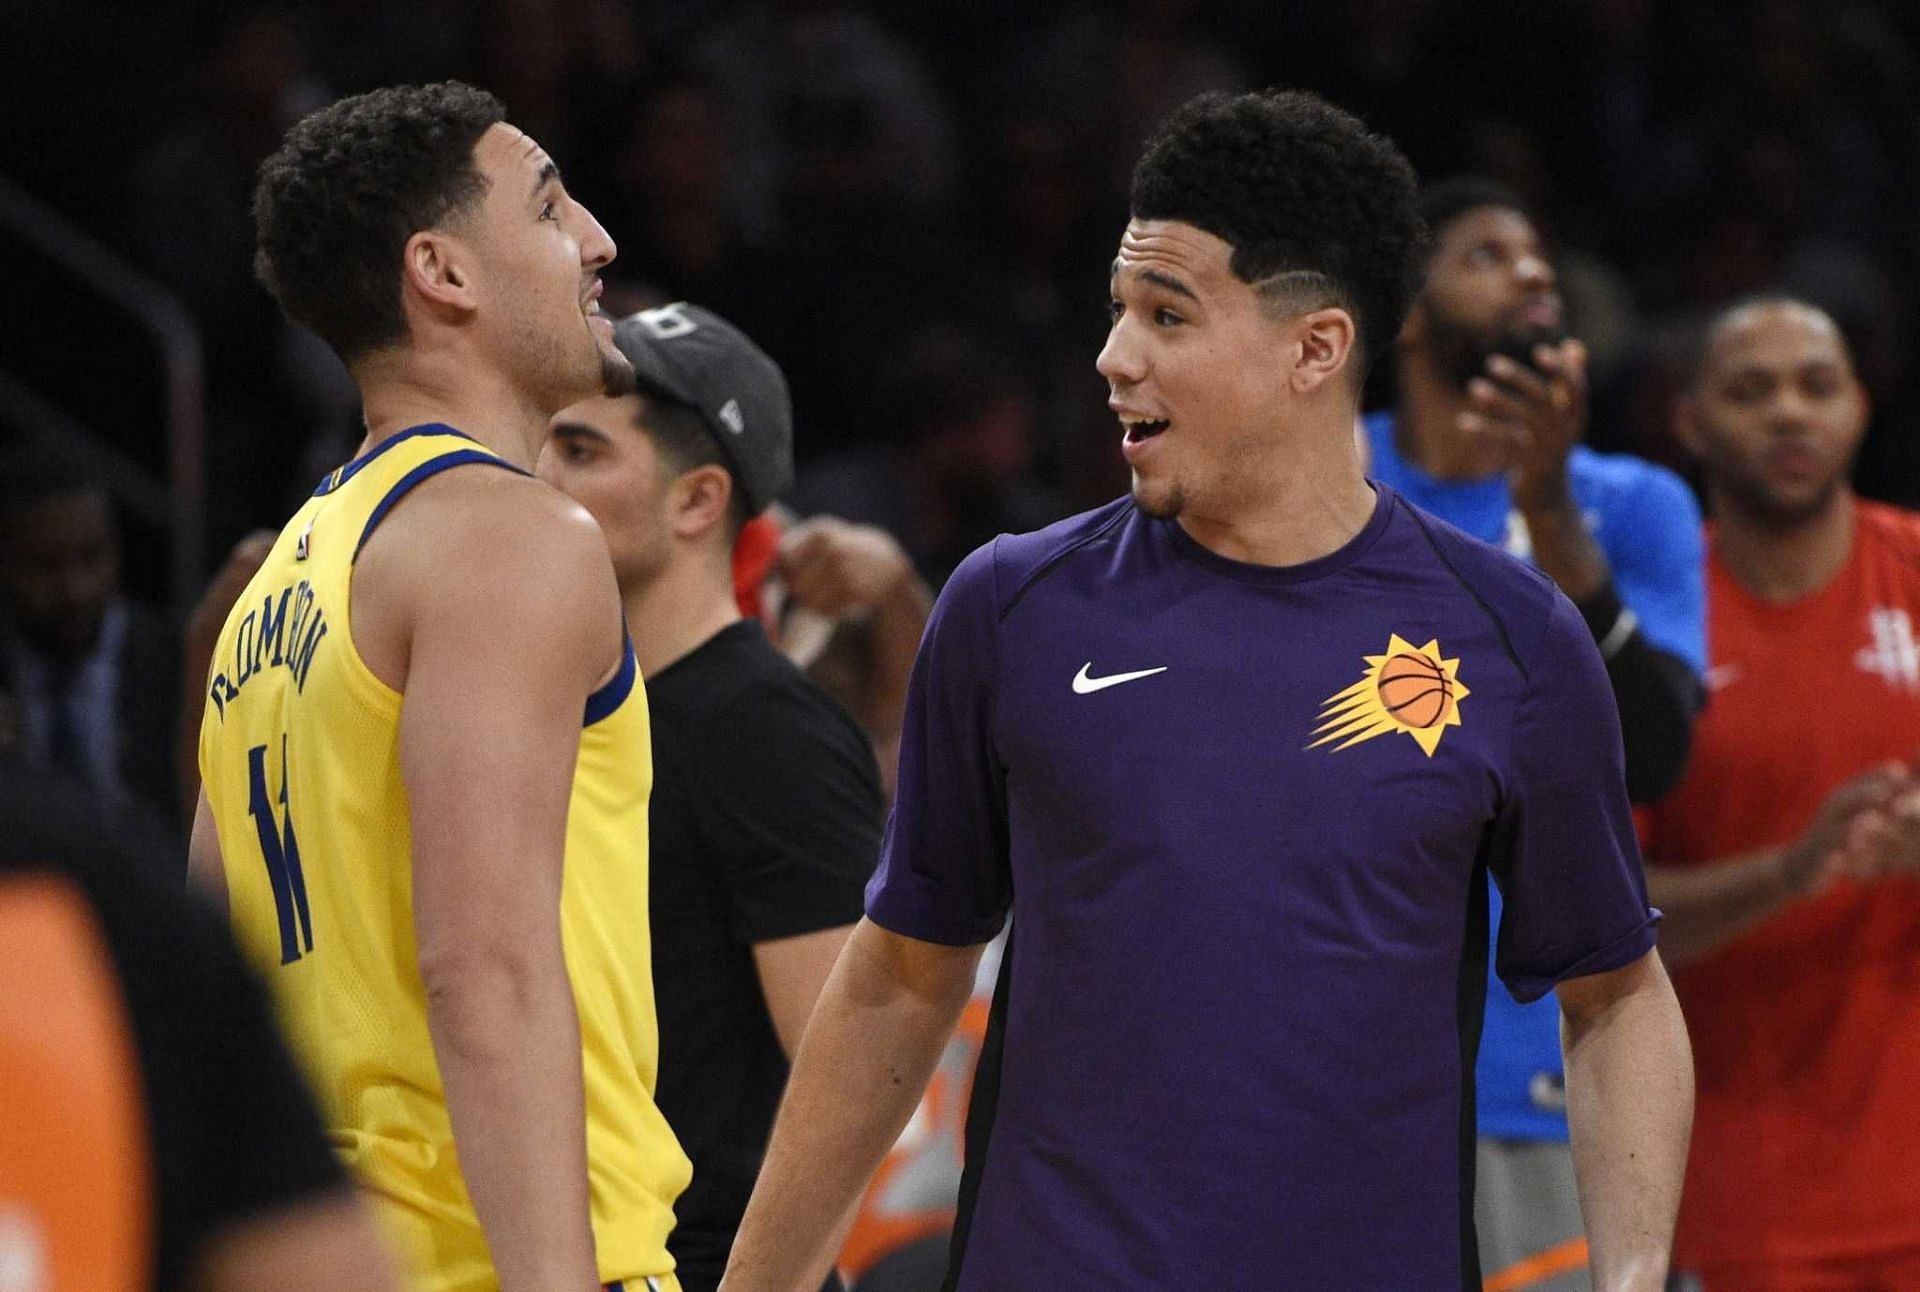 Devin Booker won the 2018 Three-Point Competition by scoring a record 28 points to beat Klay Thompson. [Photo: SFGATE]